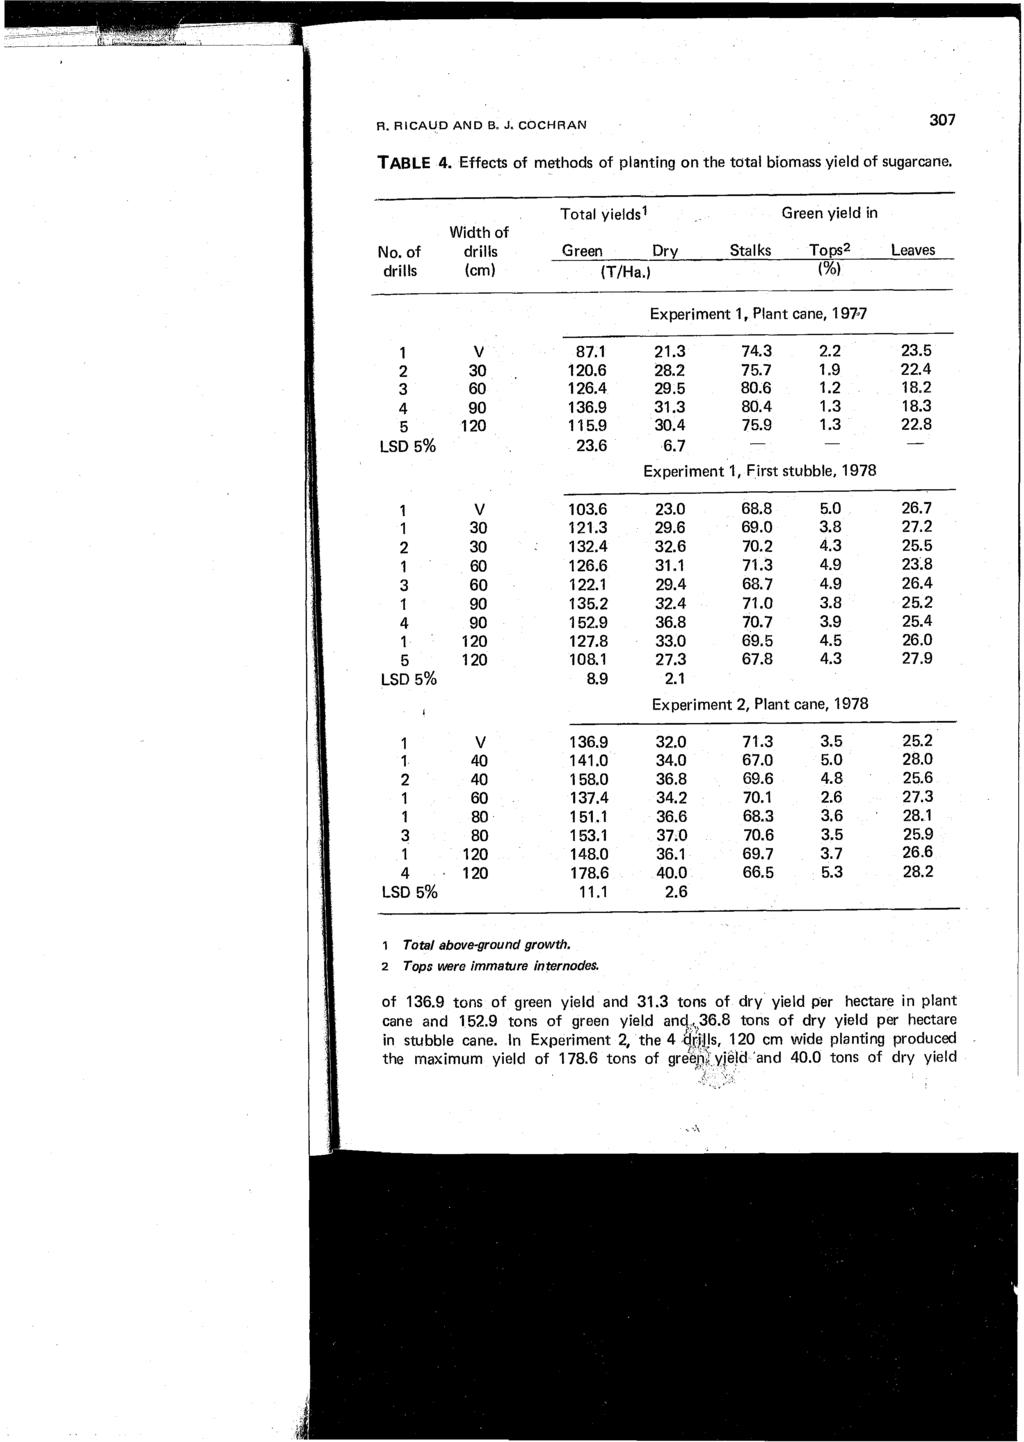 R. RICAUD AND a. J. COCHRAN 307 TABLE 4. Effects of methods of planting on the tatal biomass yield of sugarcane. Total yields Green yield in Width of No.